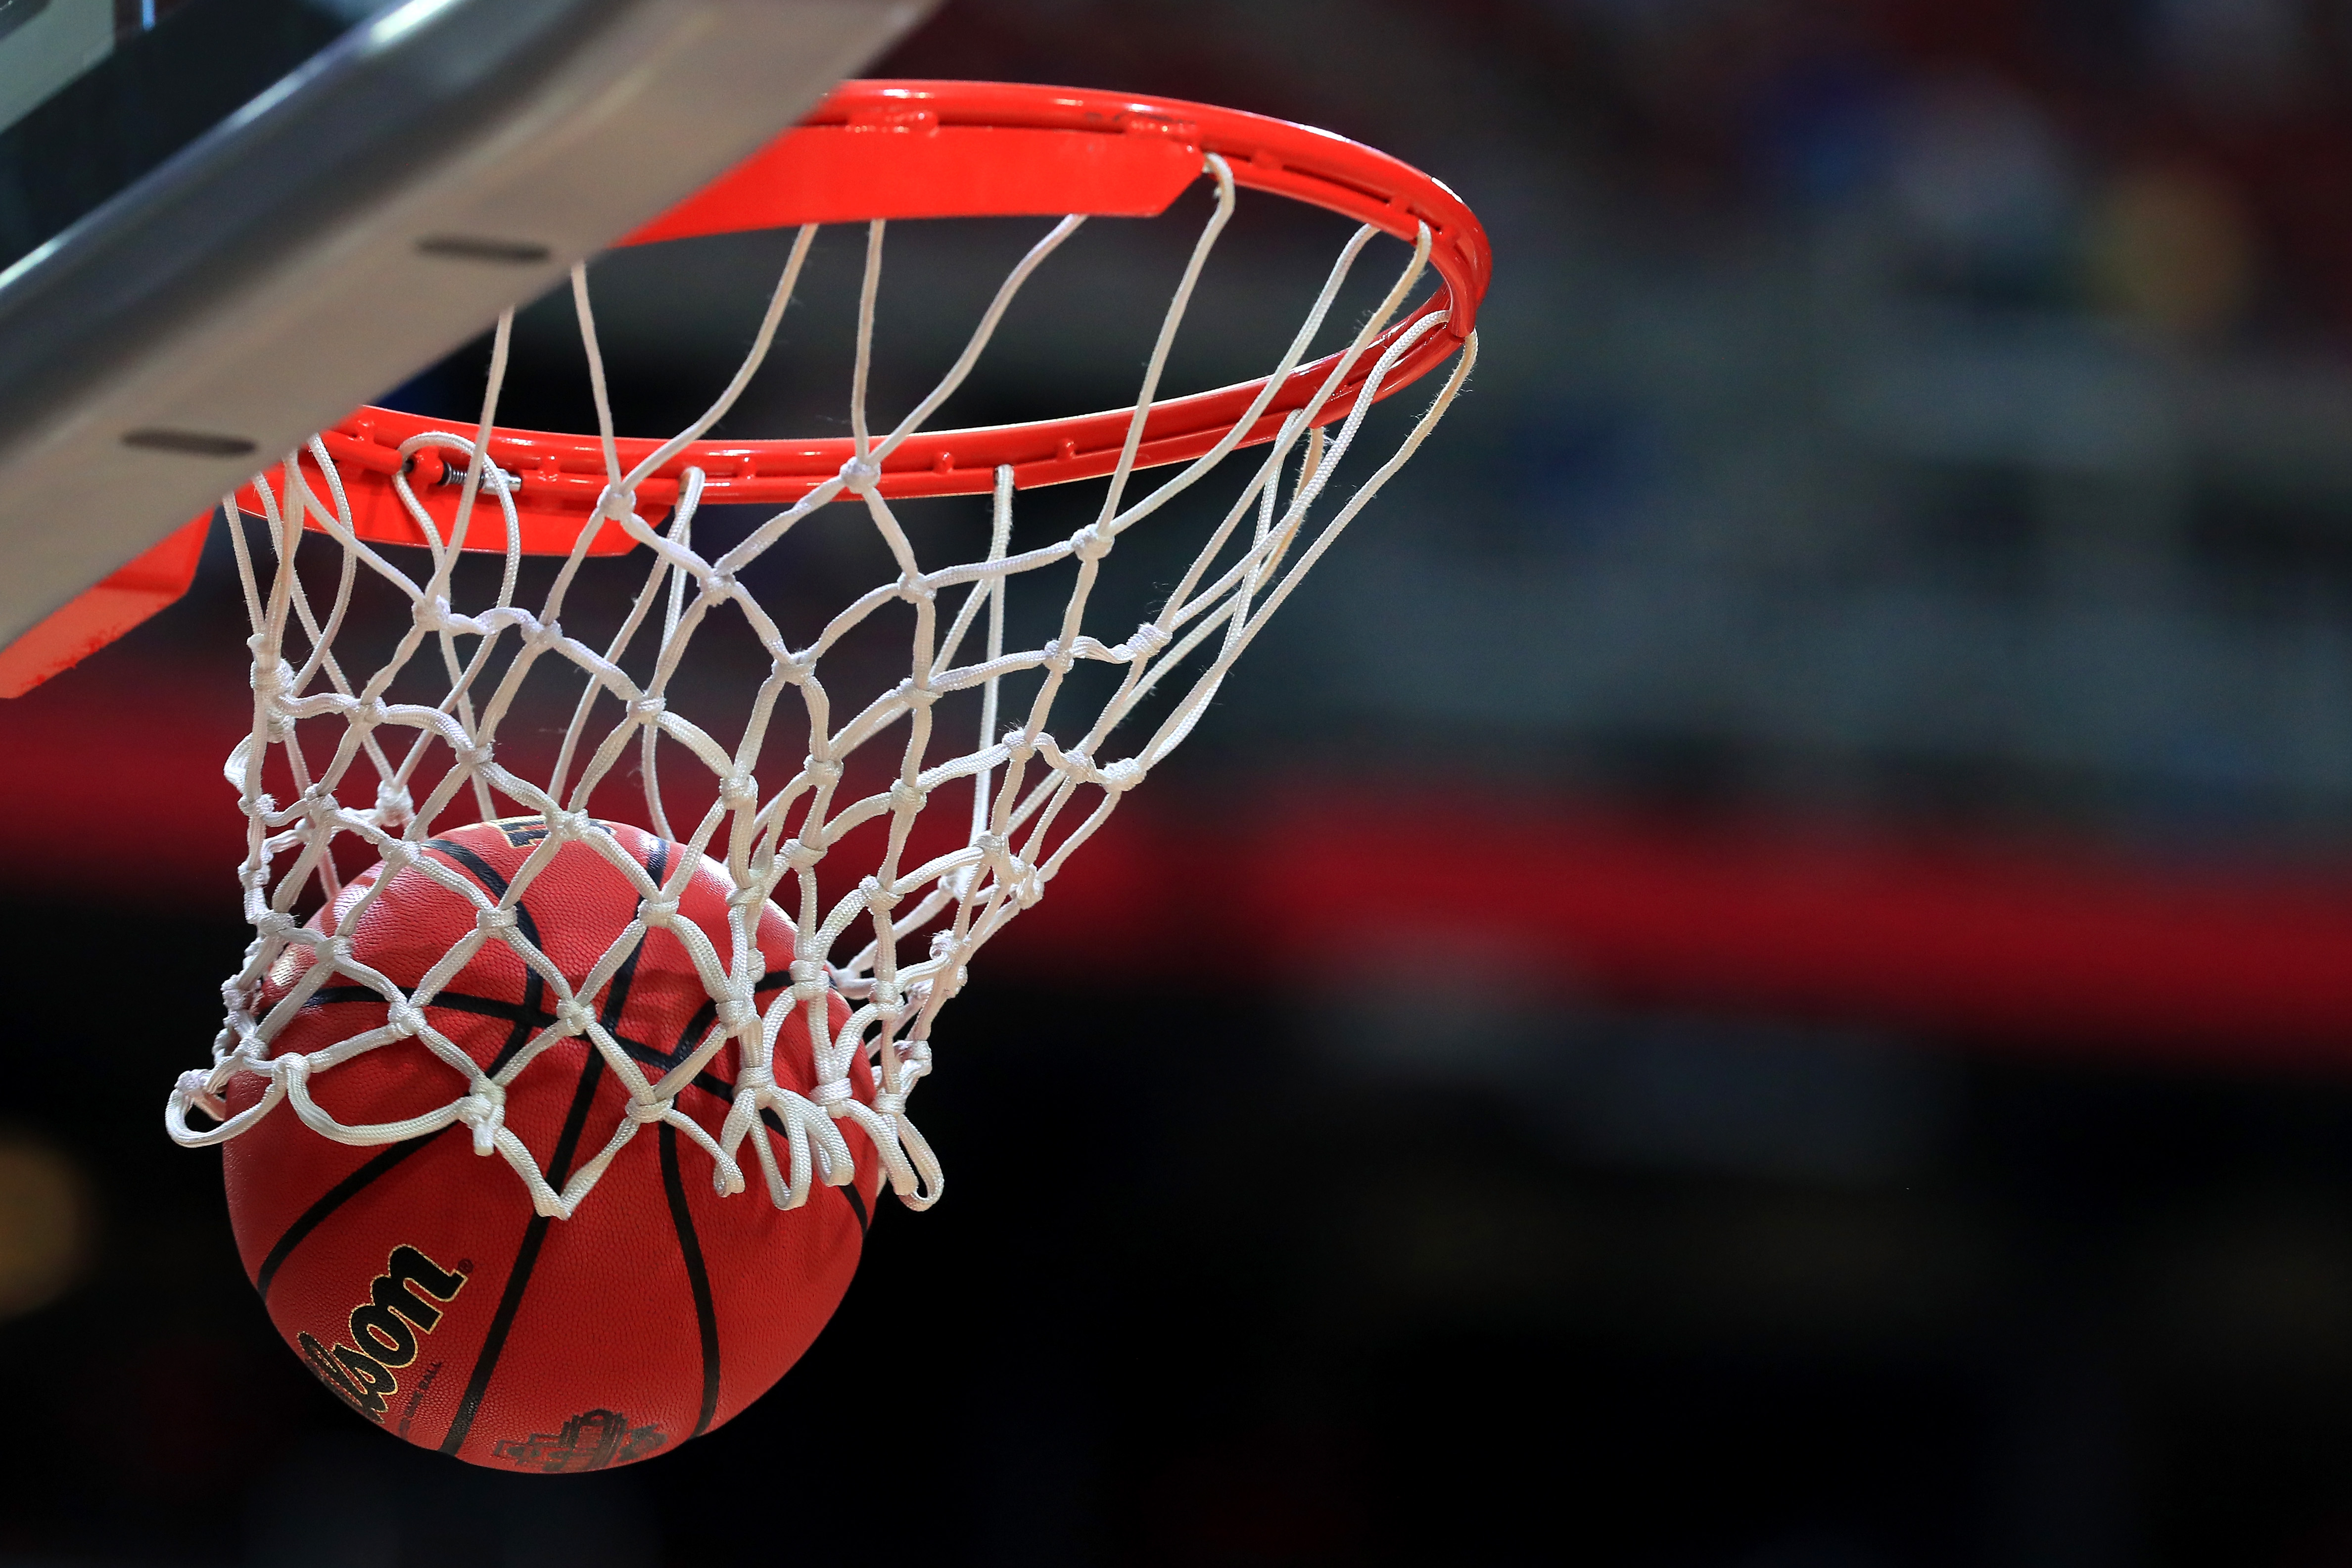 GLENDALE, AZ - APRIL 03: The ball goes through the hoop during warm ups before the game between the North Carolina Tar Heels and the Gonzaga Bulldogs during the 2017 NCAA Men's Final Four National Championship game at University of Phoenix Stadium on April 3, 2017 in Glendale, Arizona.  (Photo by Ronald Martinez/Getty Images)